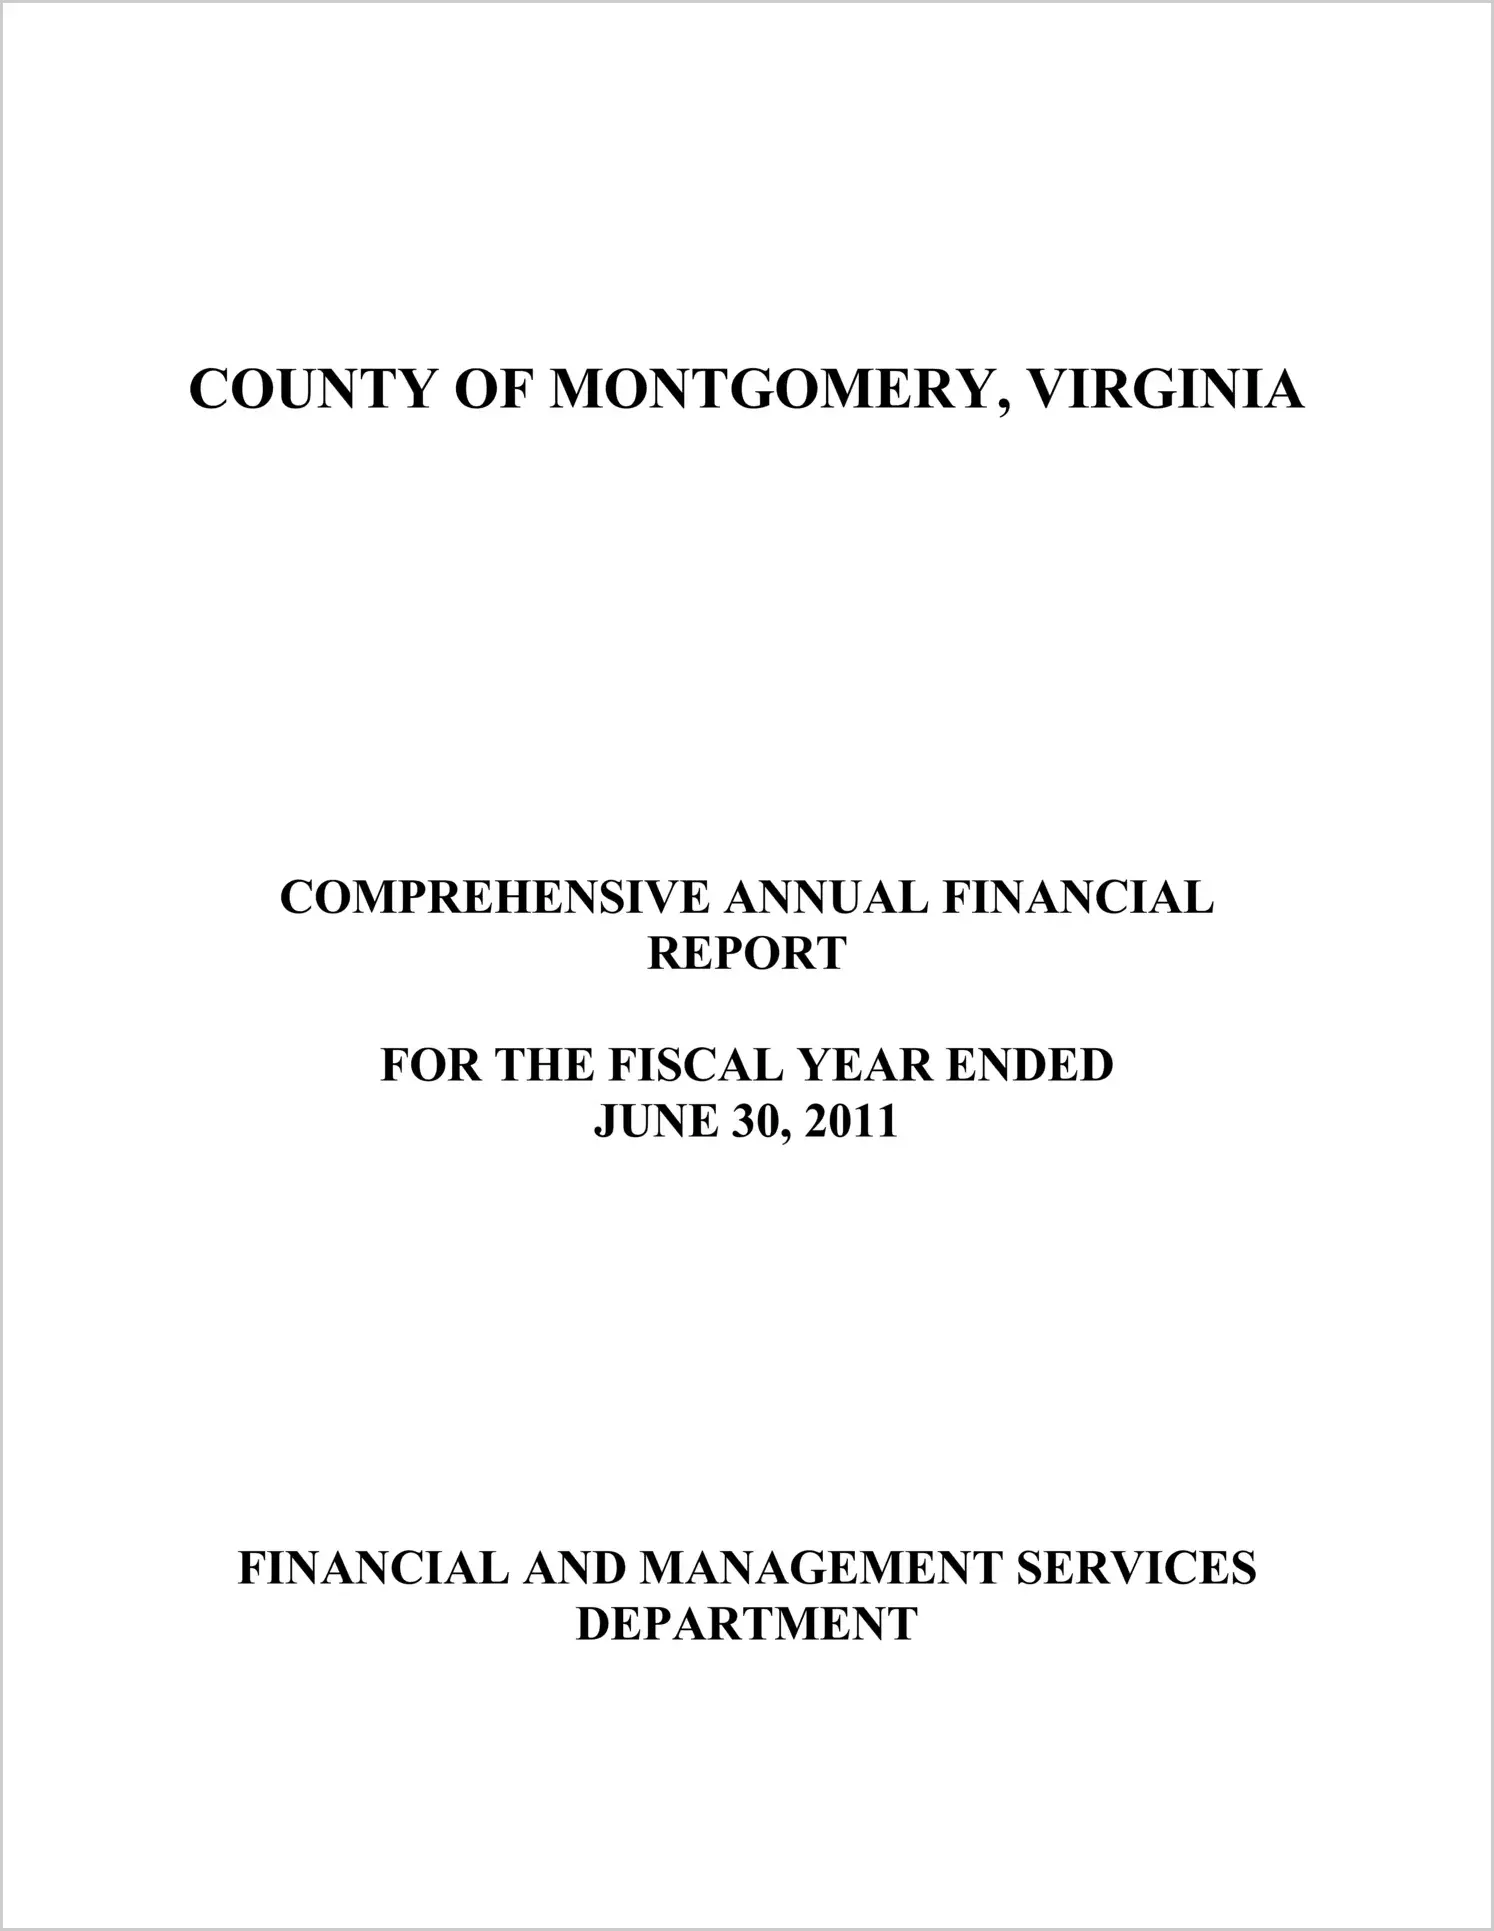 2011 Annual Financial Report for County of Montgomery